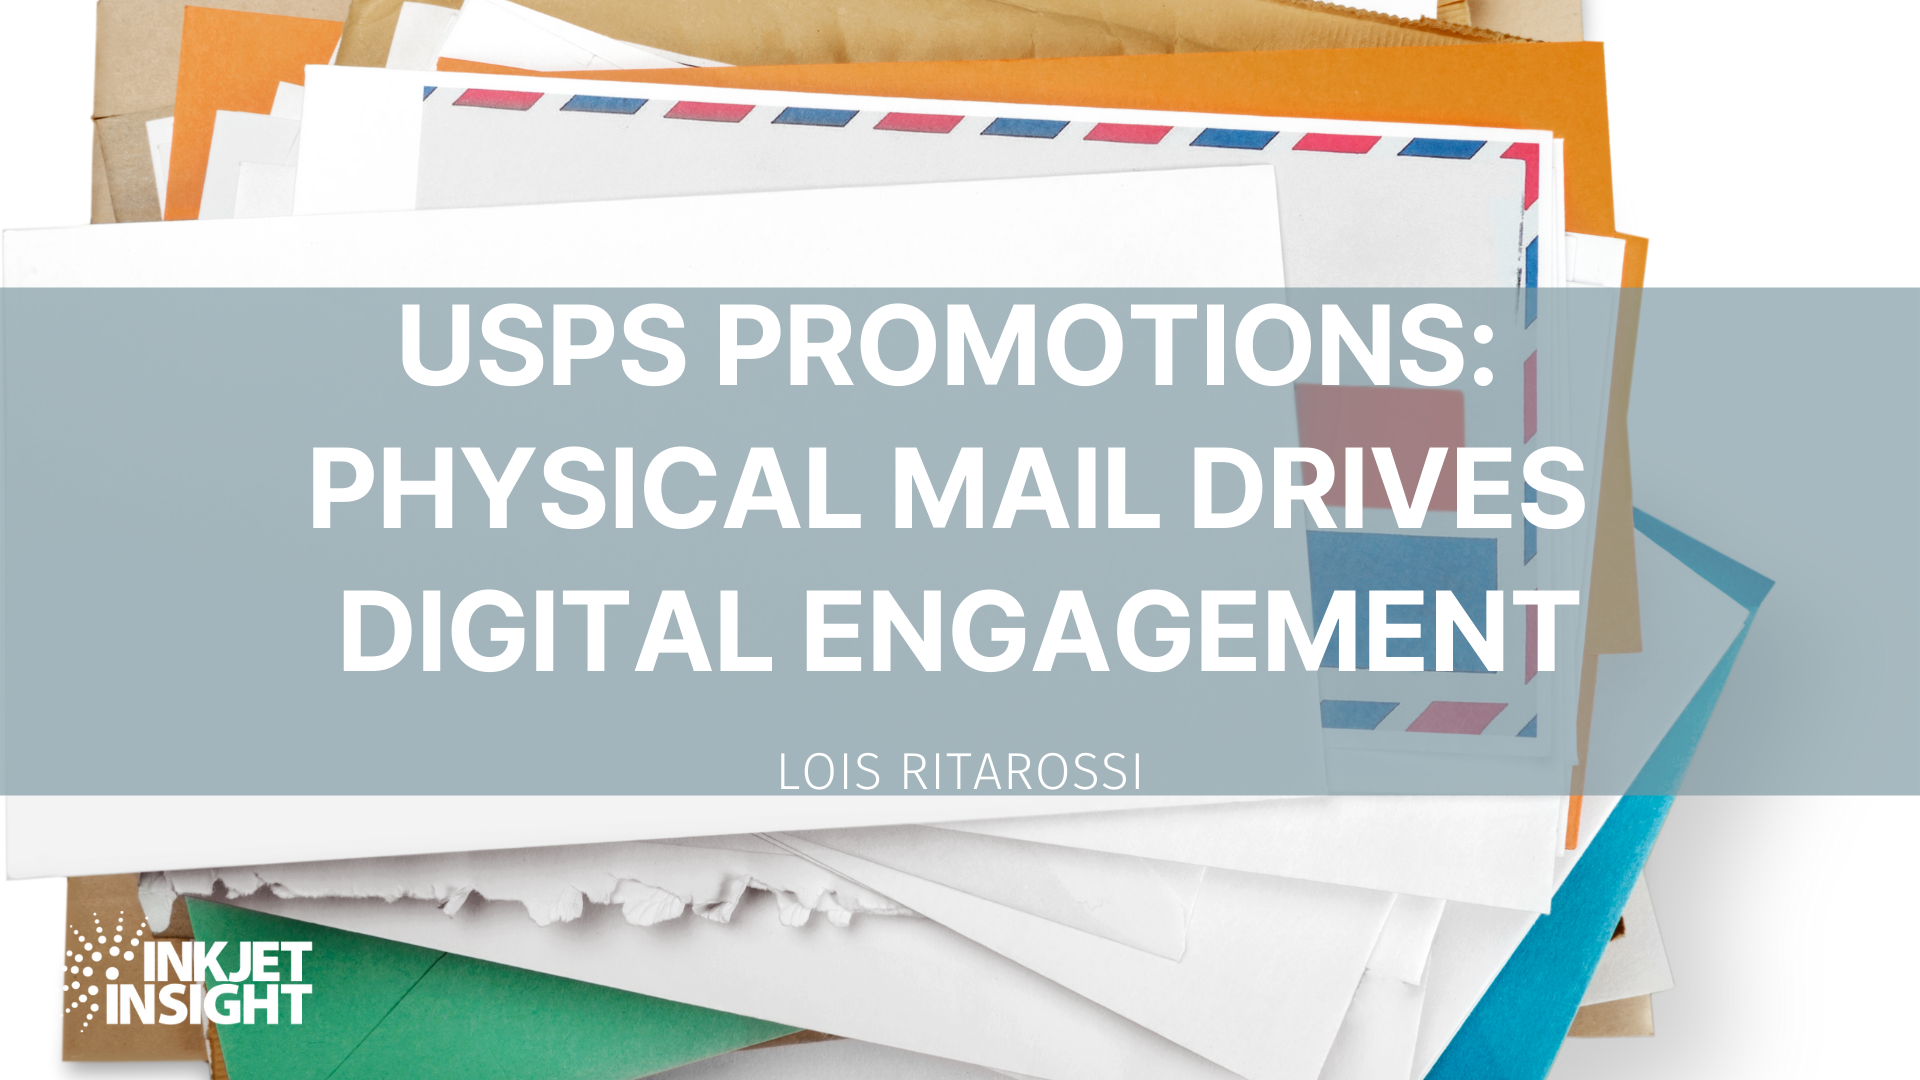 Featured image for “USPS Promotions: Physical Mail Drives Digital Engagement”